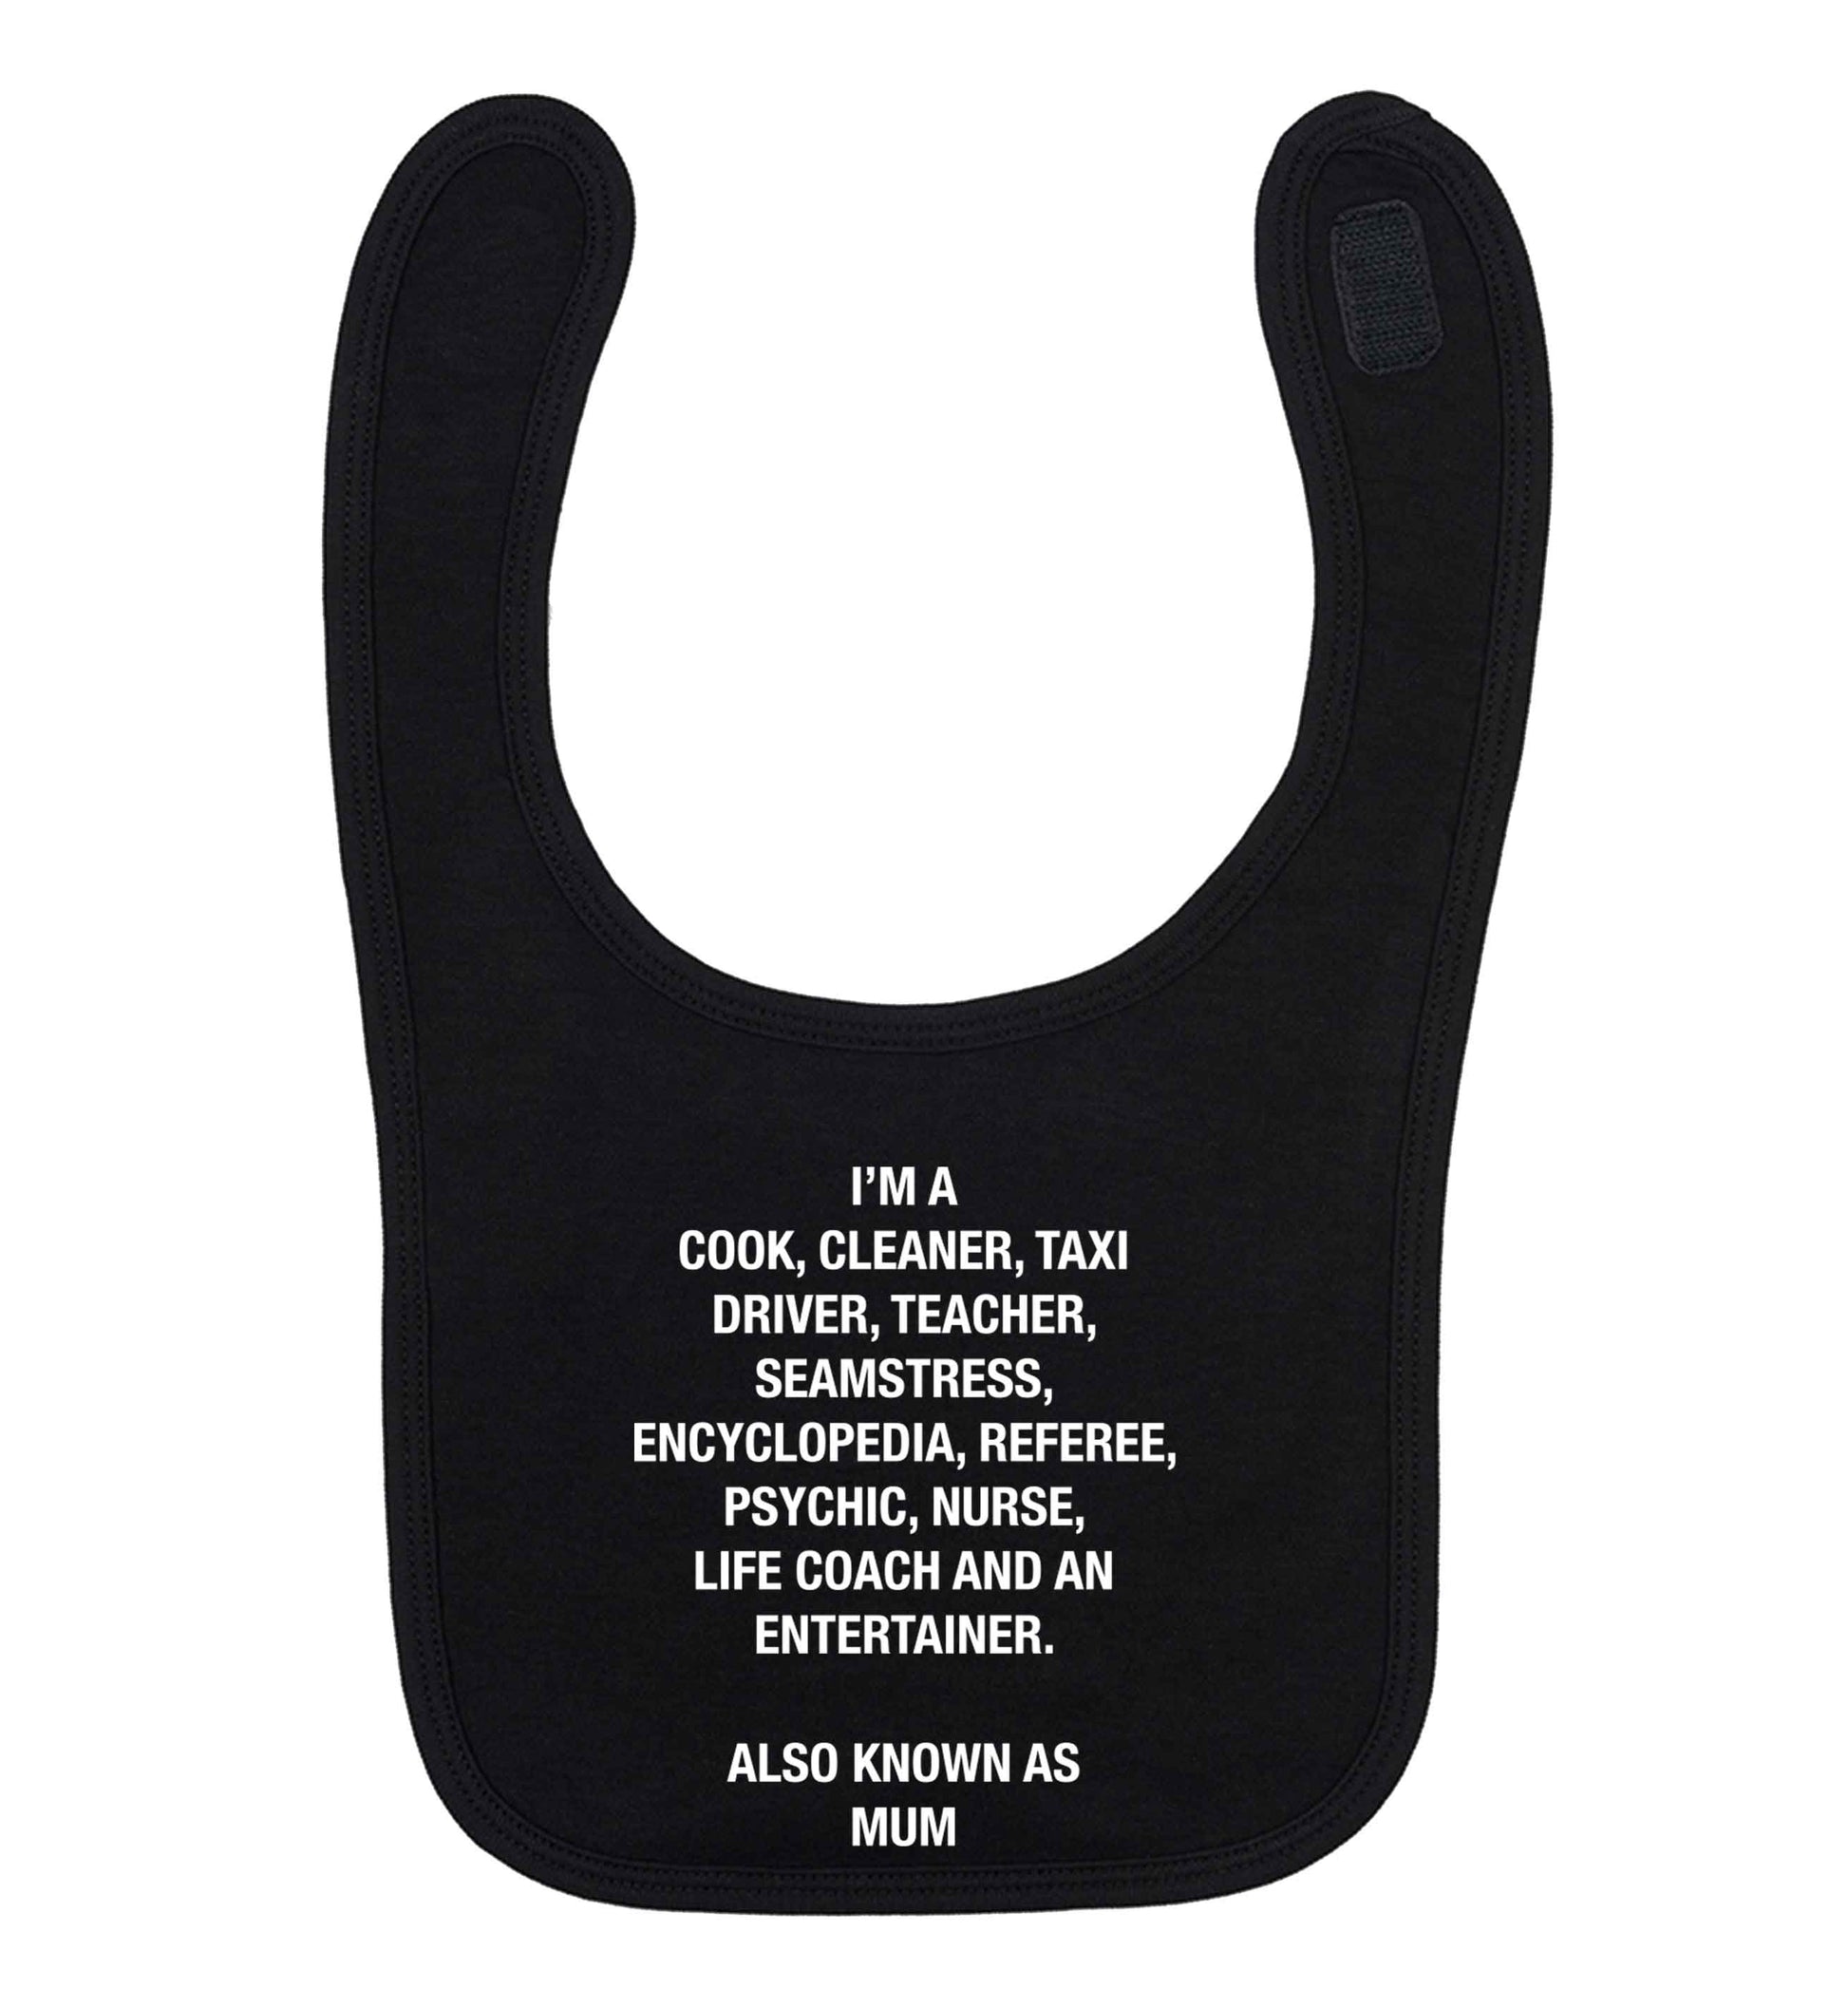 Funny gifts for your mum on mother's dayor her birthday! Mum, cook, cleaner, taxi driver, teacher, seamstress, encyclopedia, referee, psychic, nurse, life coach and entertainer black baby bib